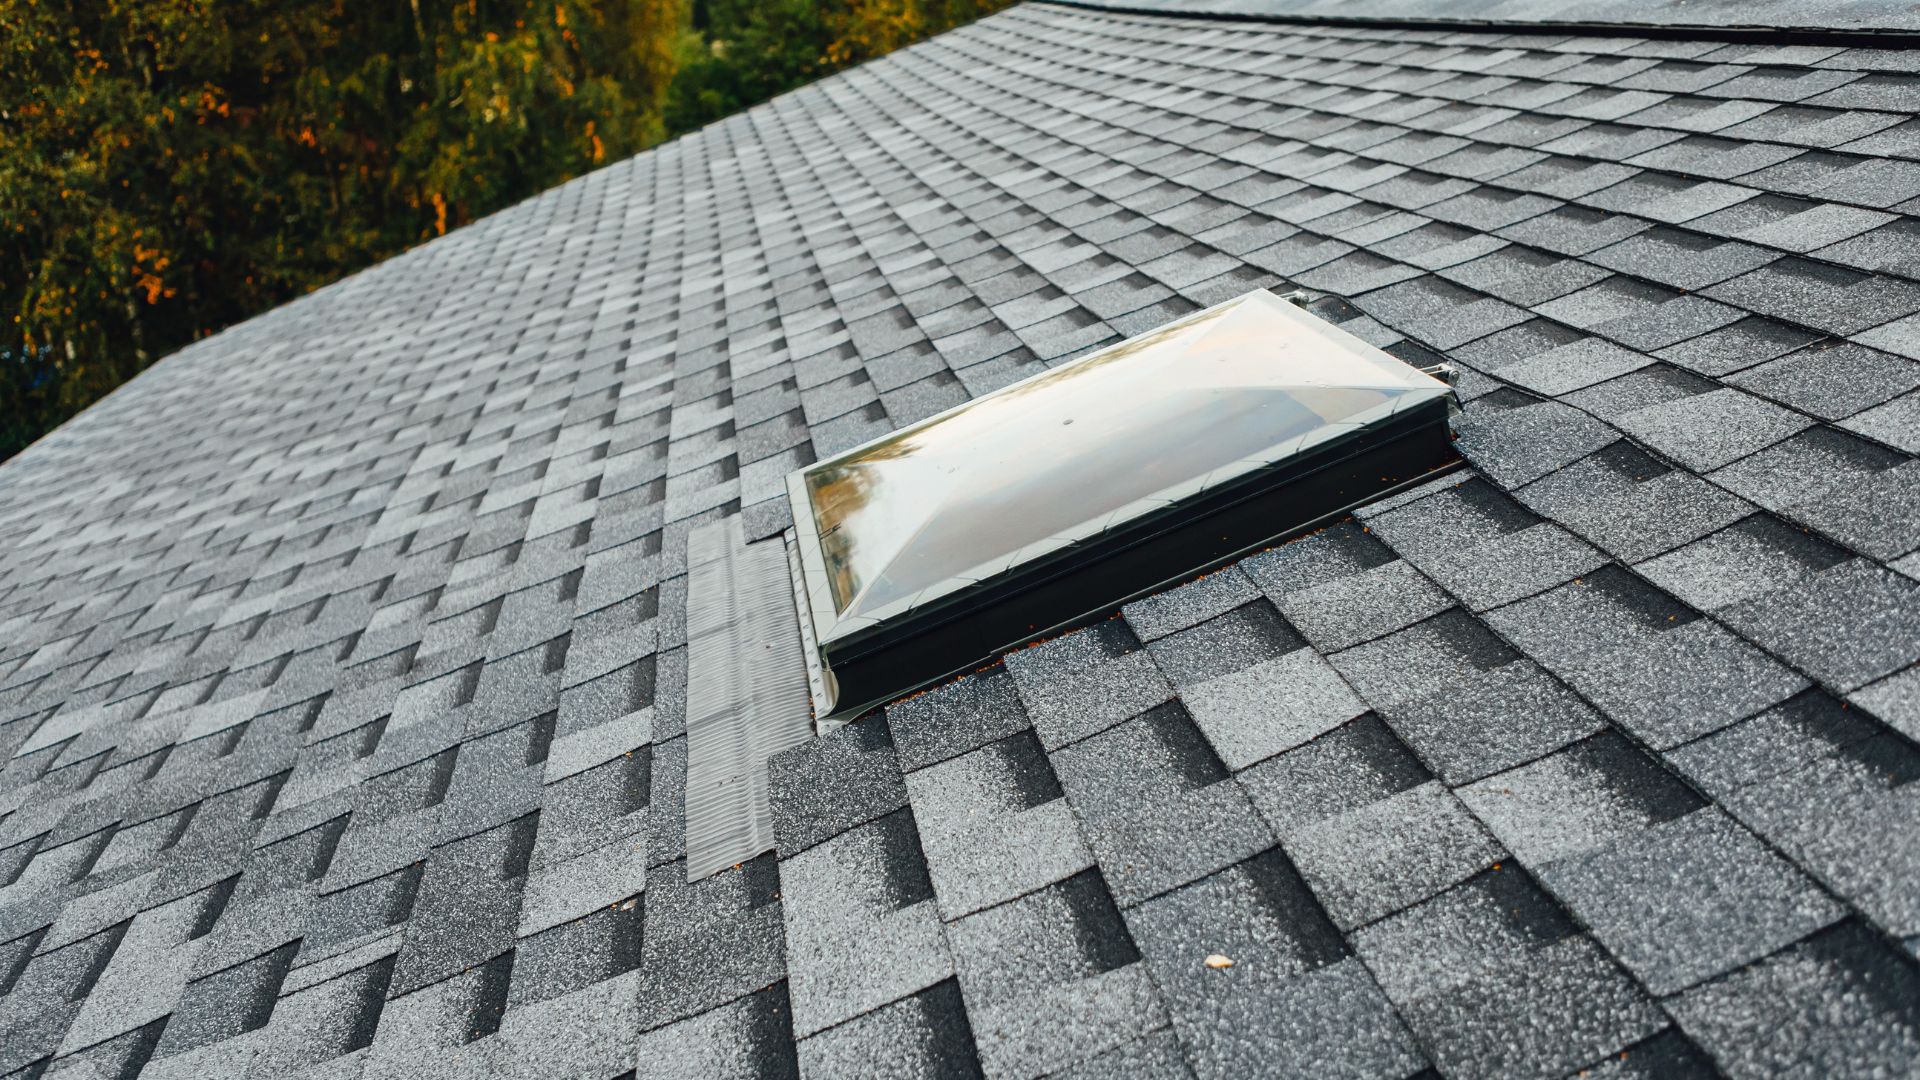 Technical Aspects of Roofing Energy Efficiency from PRSE